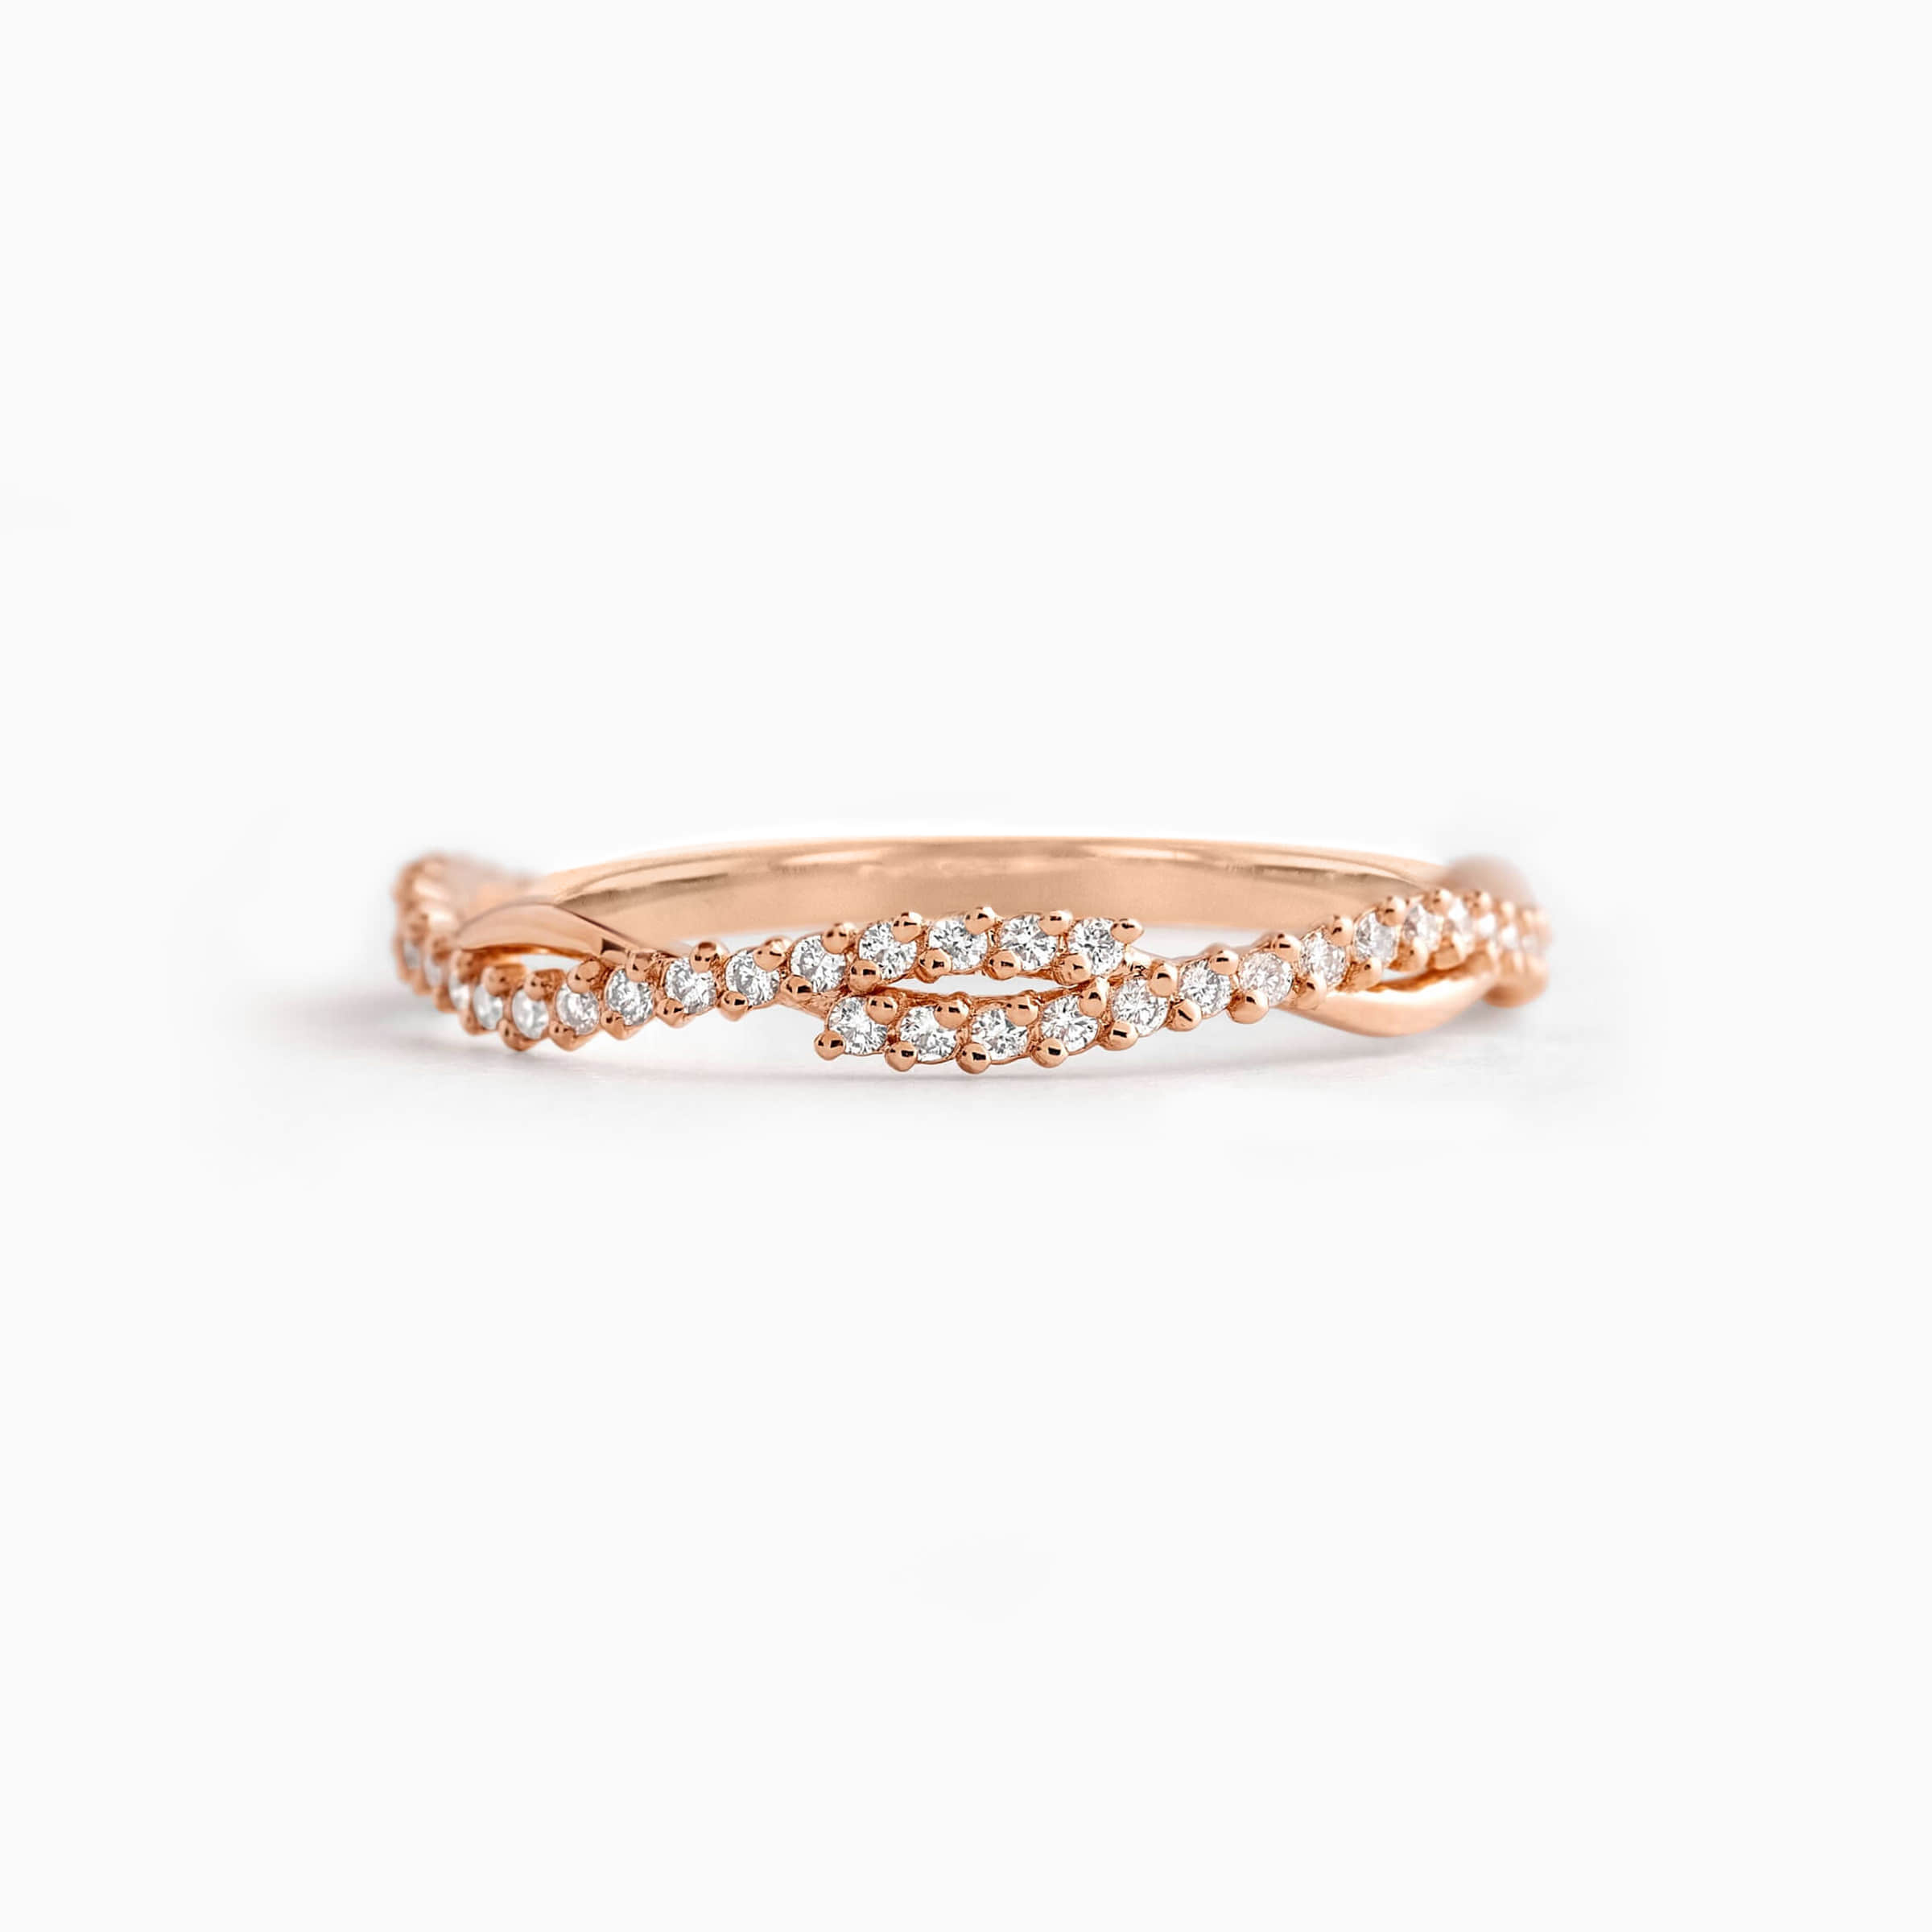 Darry Ring twisted eternity wedding ring in rose gold